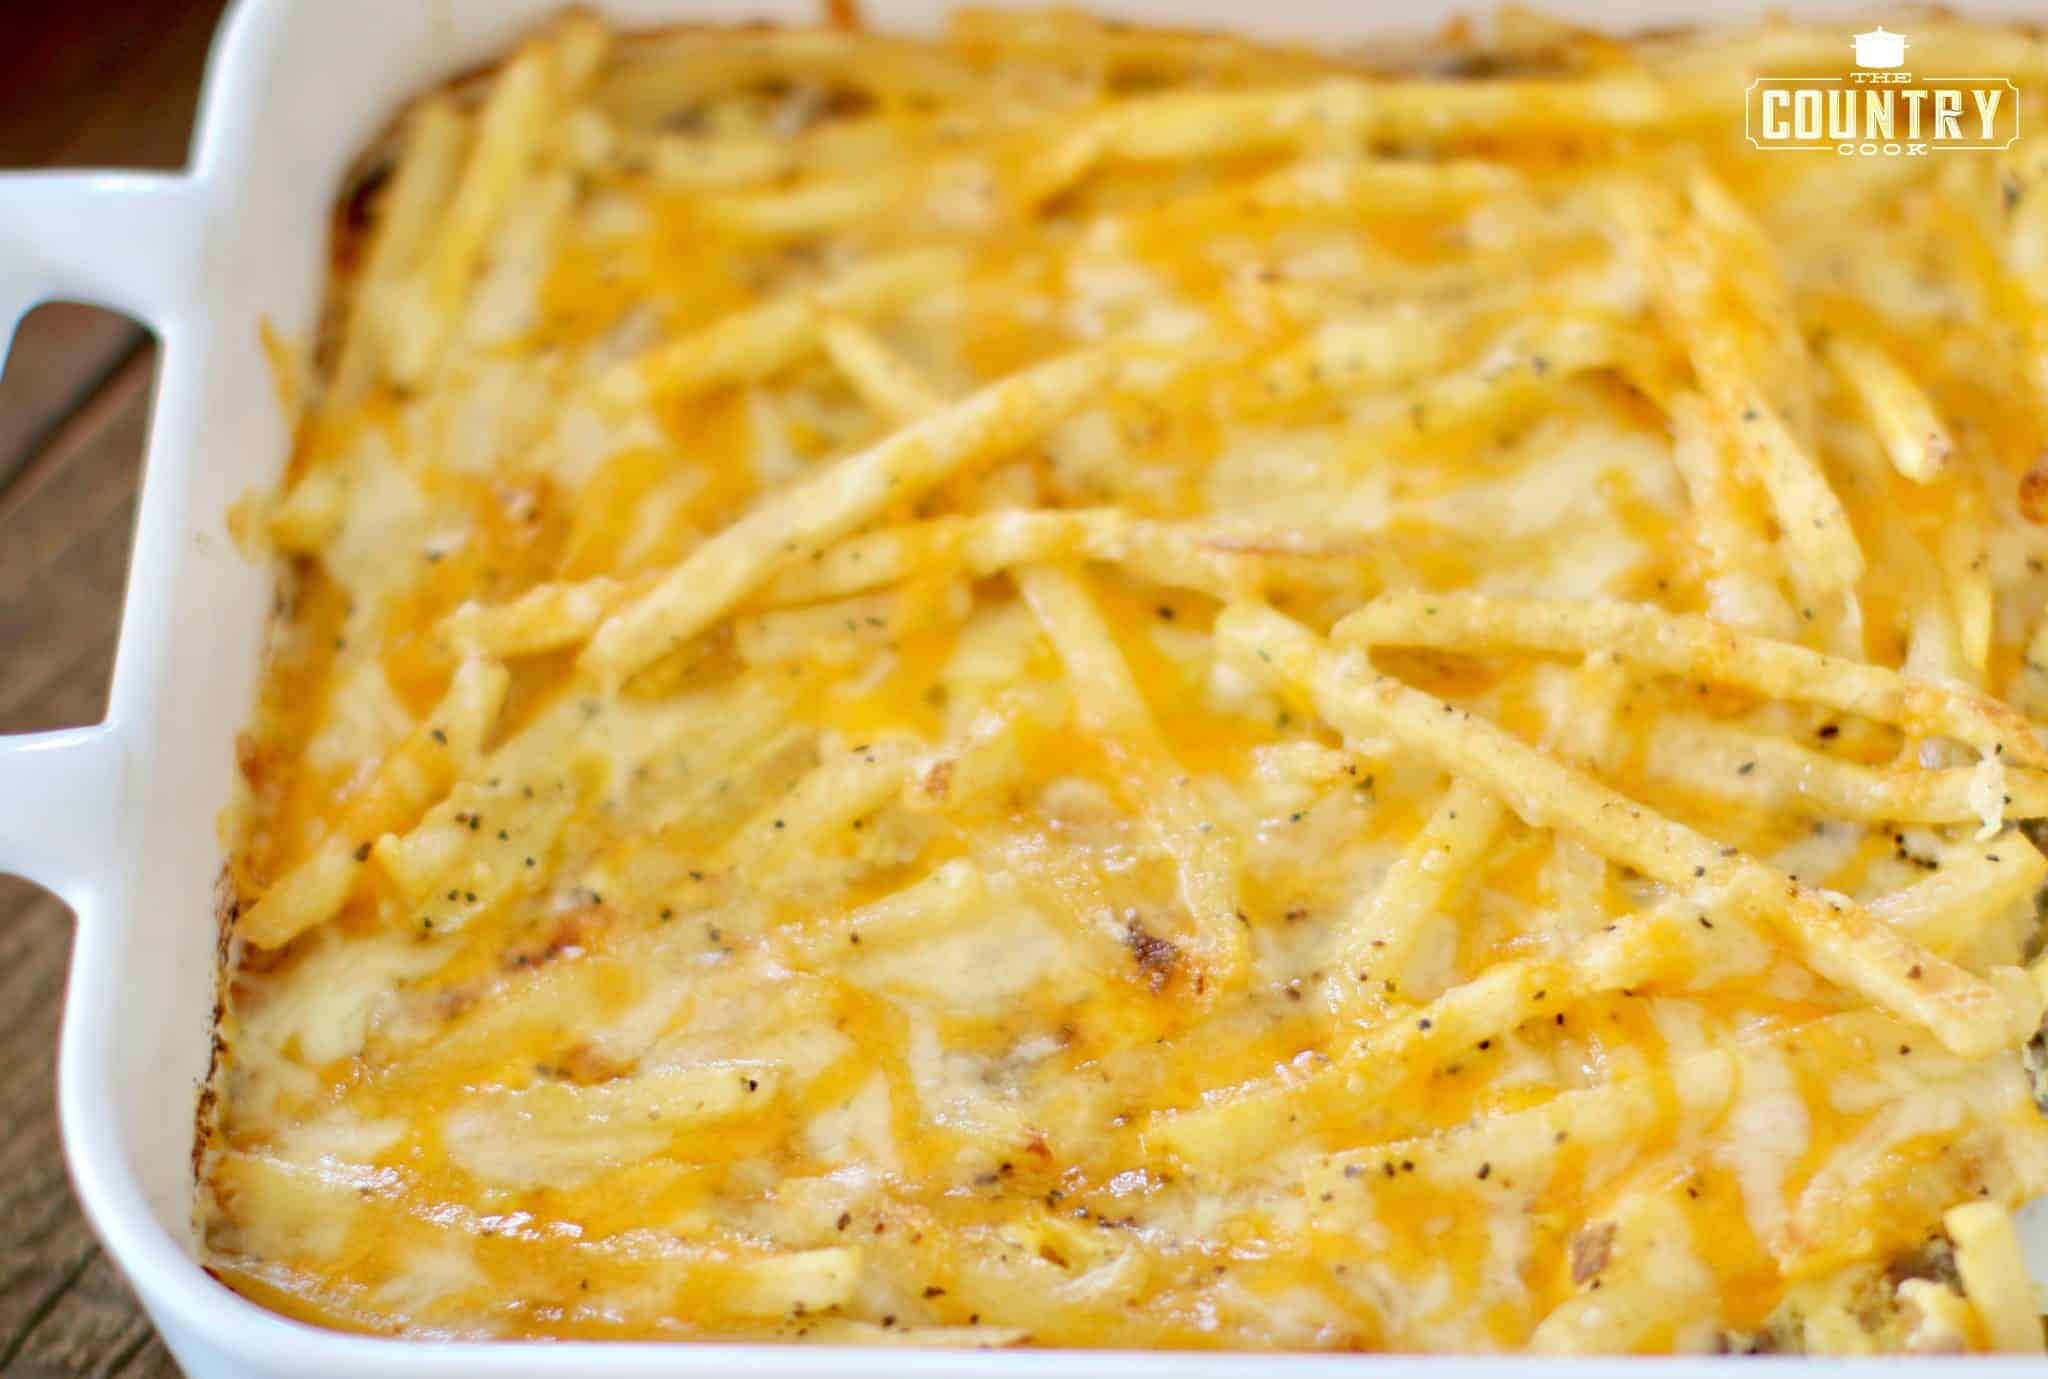 Cheeseburger and Fries Casserole shown fully baked with melted cheese.